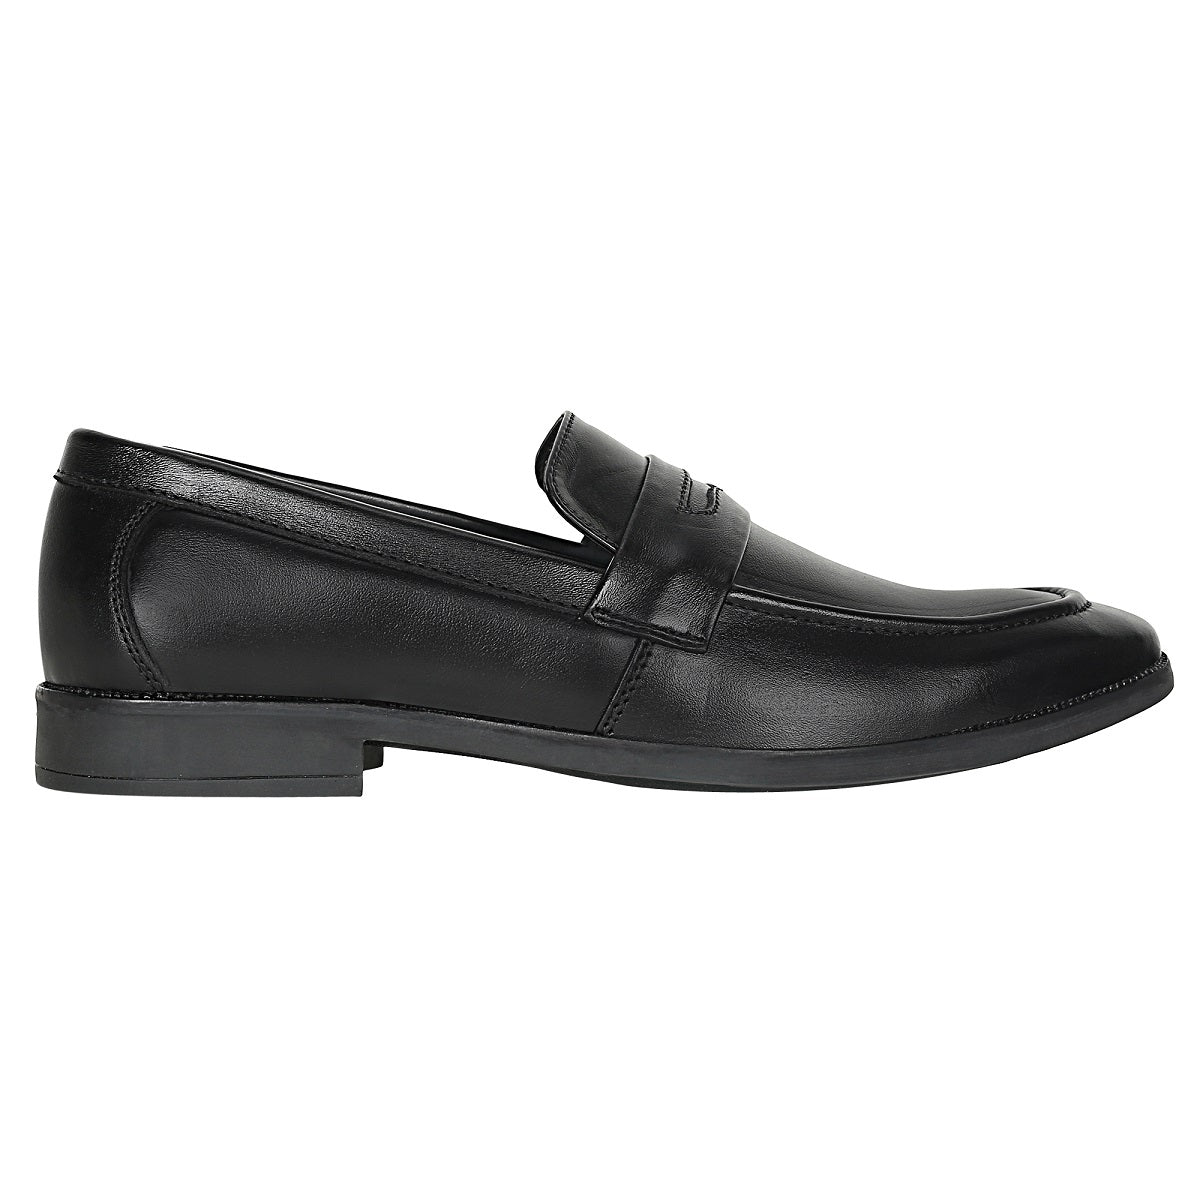 Penny Leather Loafers for Men - Defective